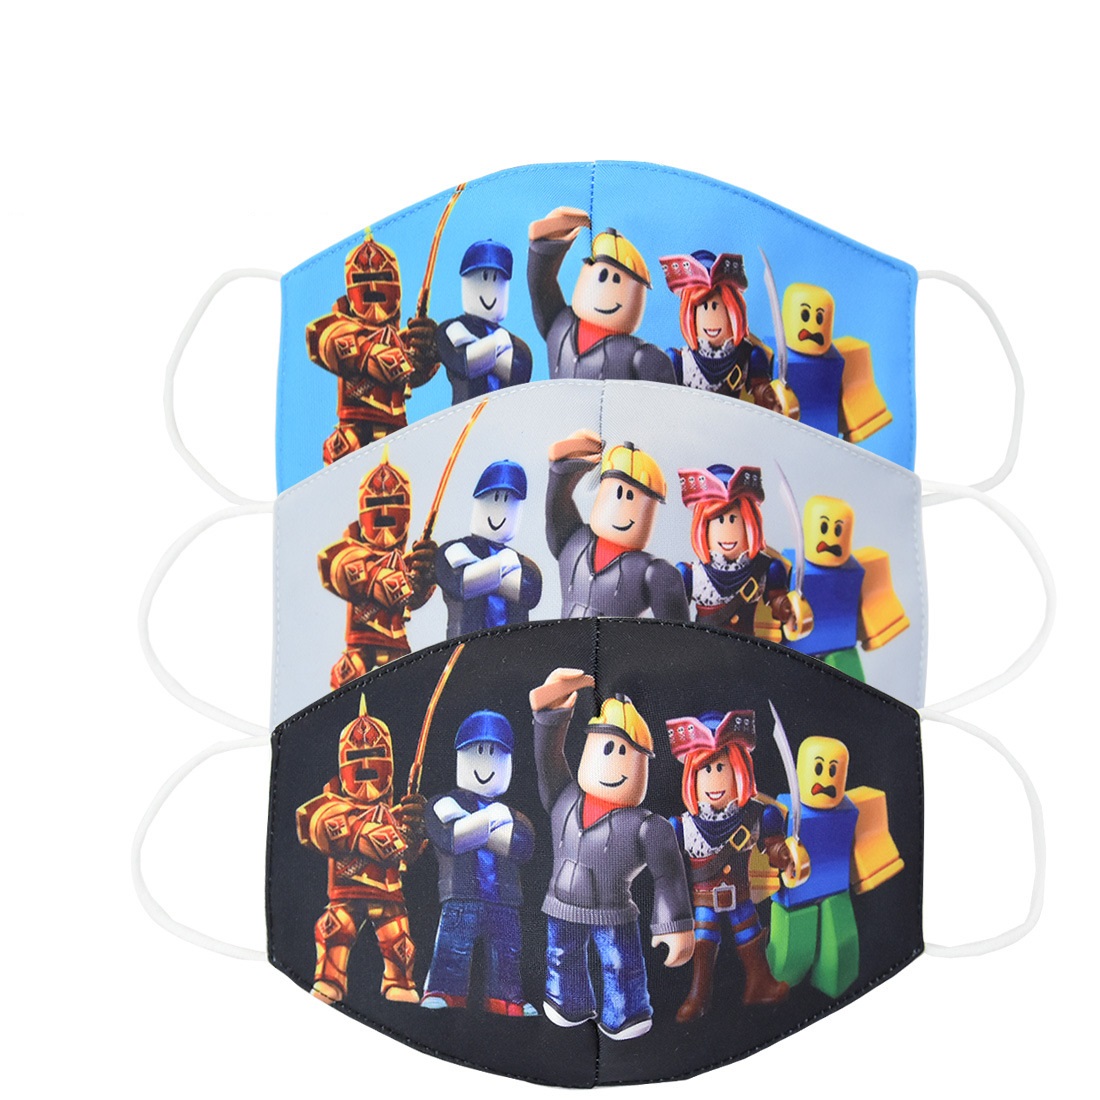 roblox ids for faces to rp with